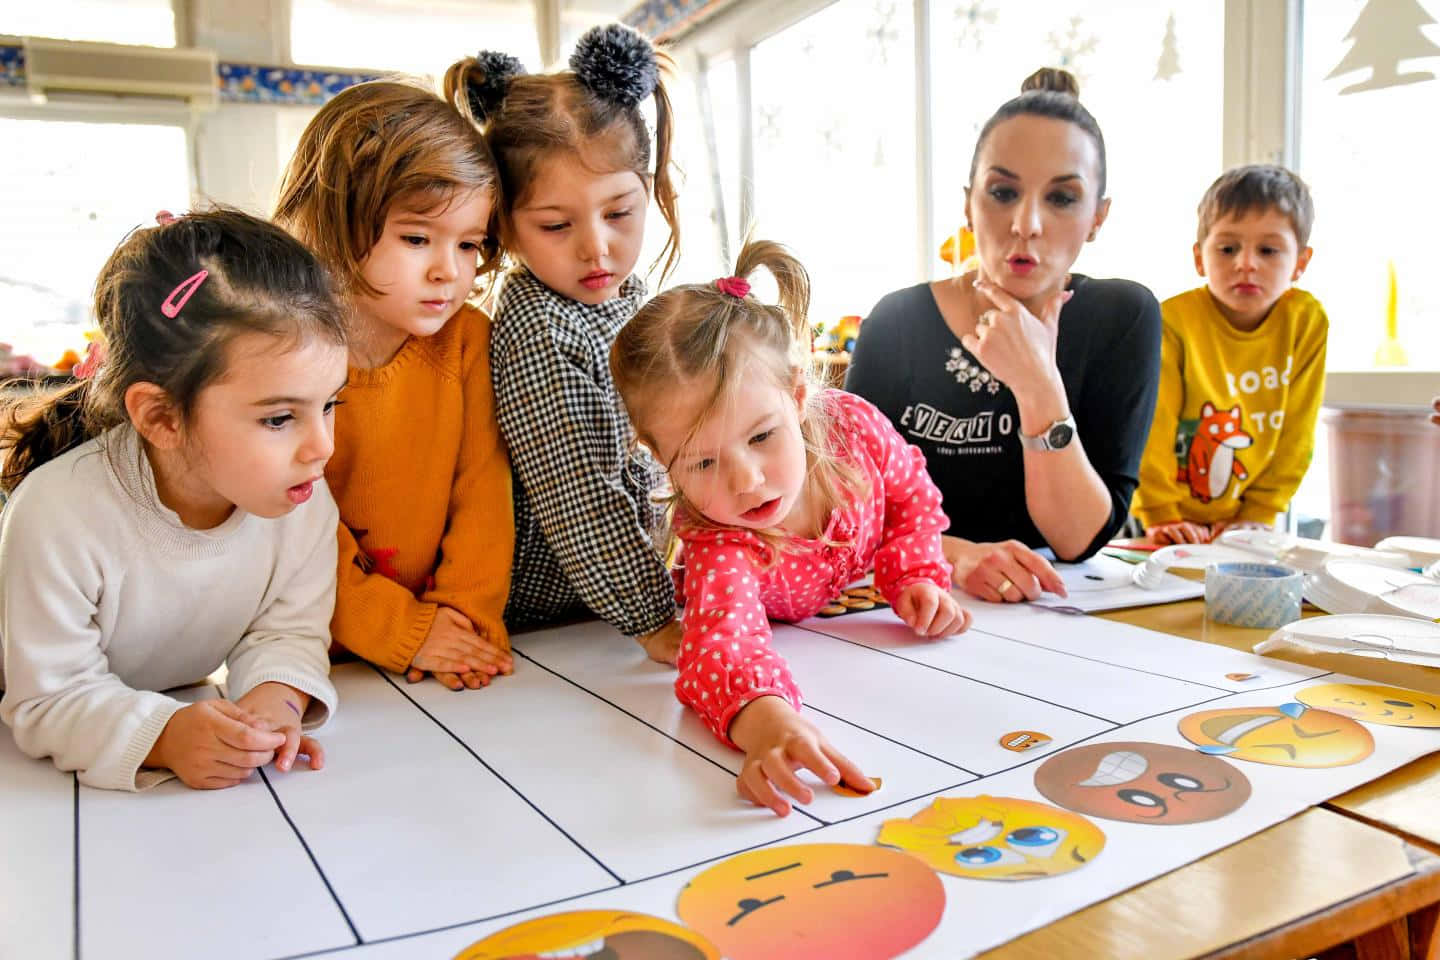 A Group Of Children Are Looking At A Paper With Emojis